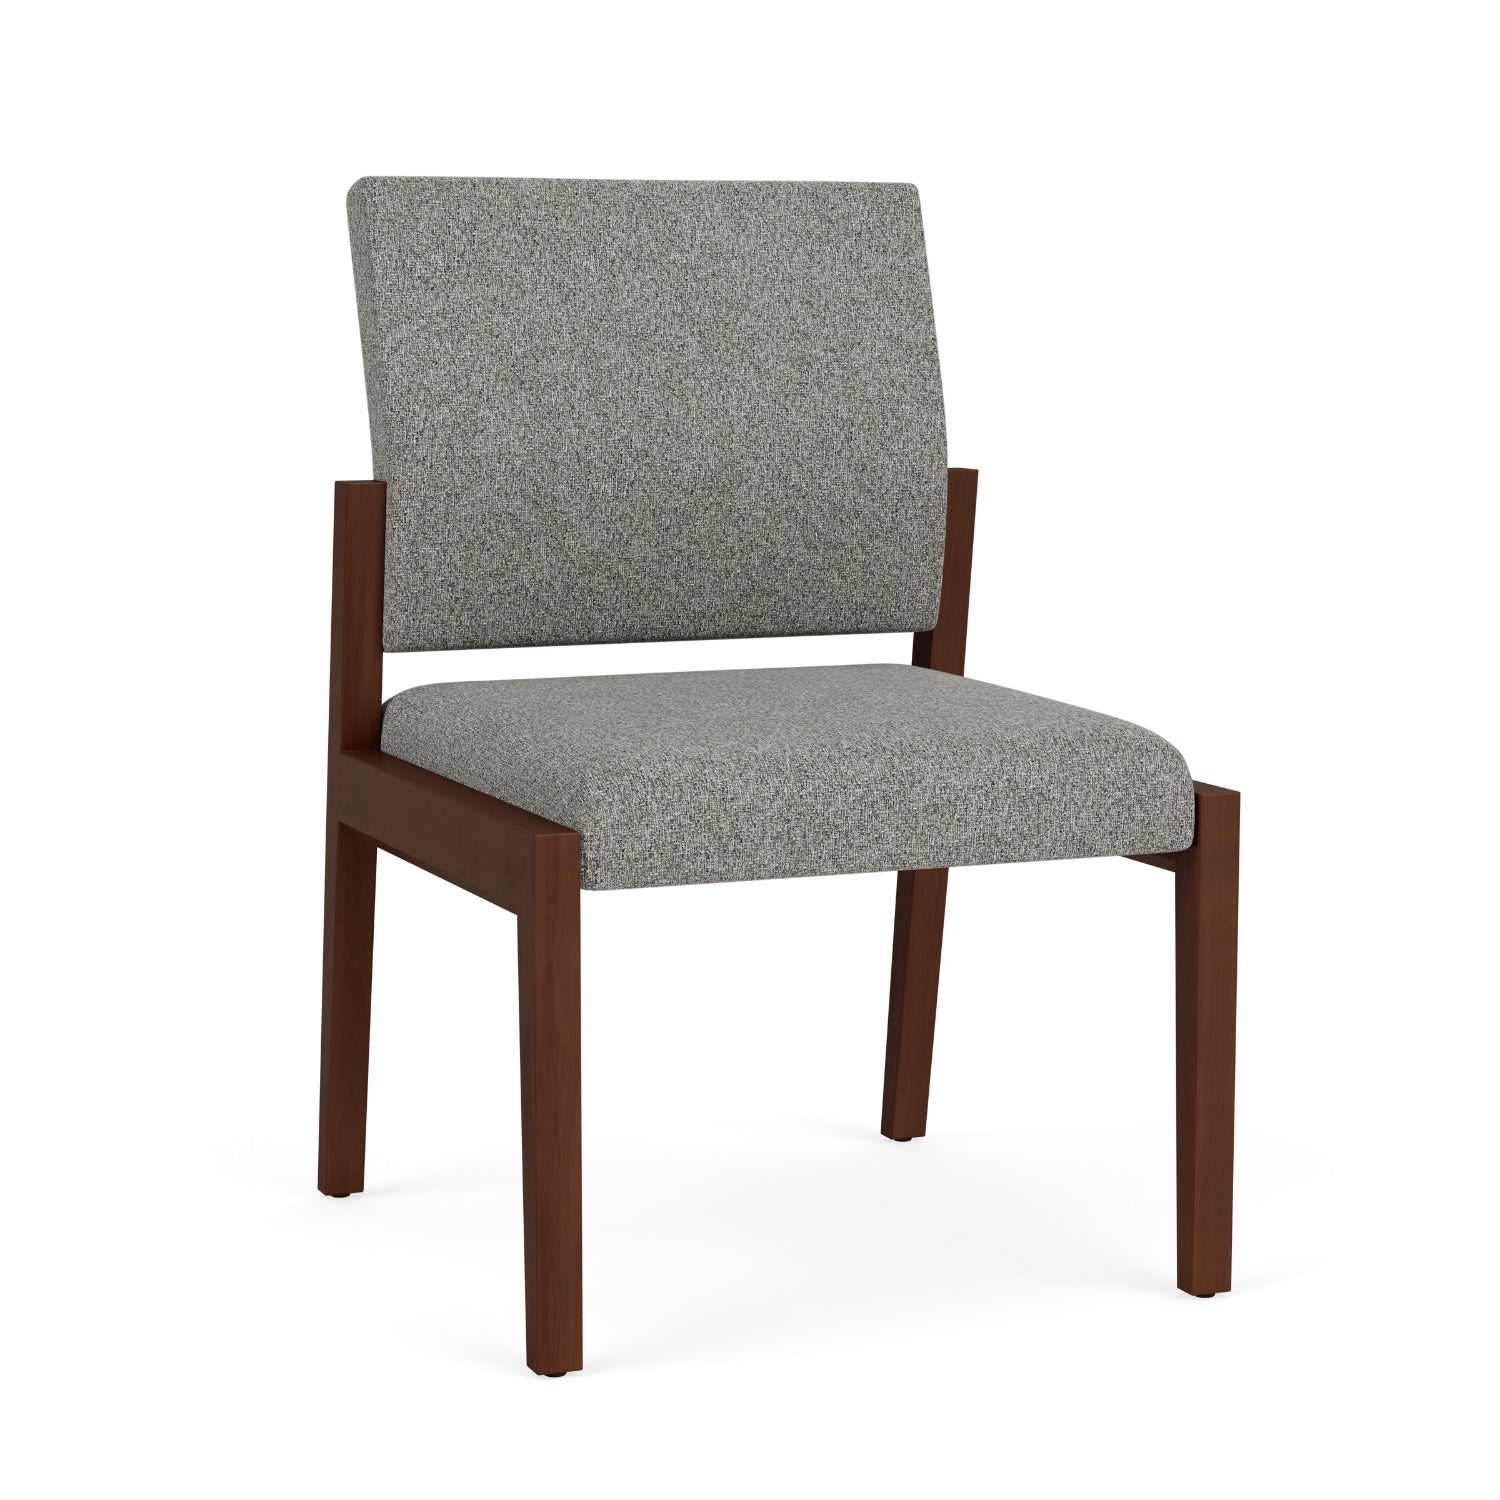 Brooklyn Collection Reception Seating, Armless Guest Chair, Standard Fabric Upholstery, FREE SHIPPING